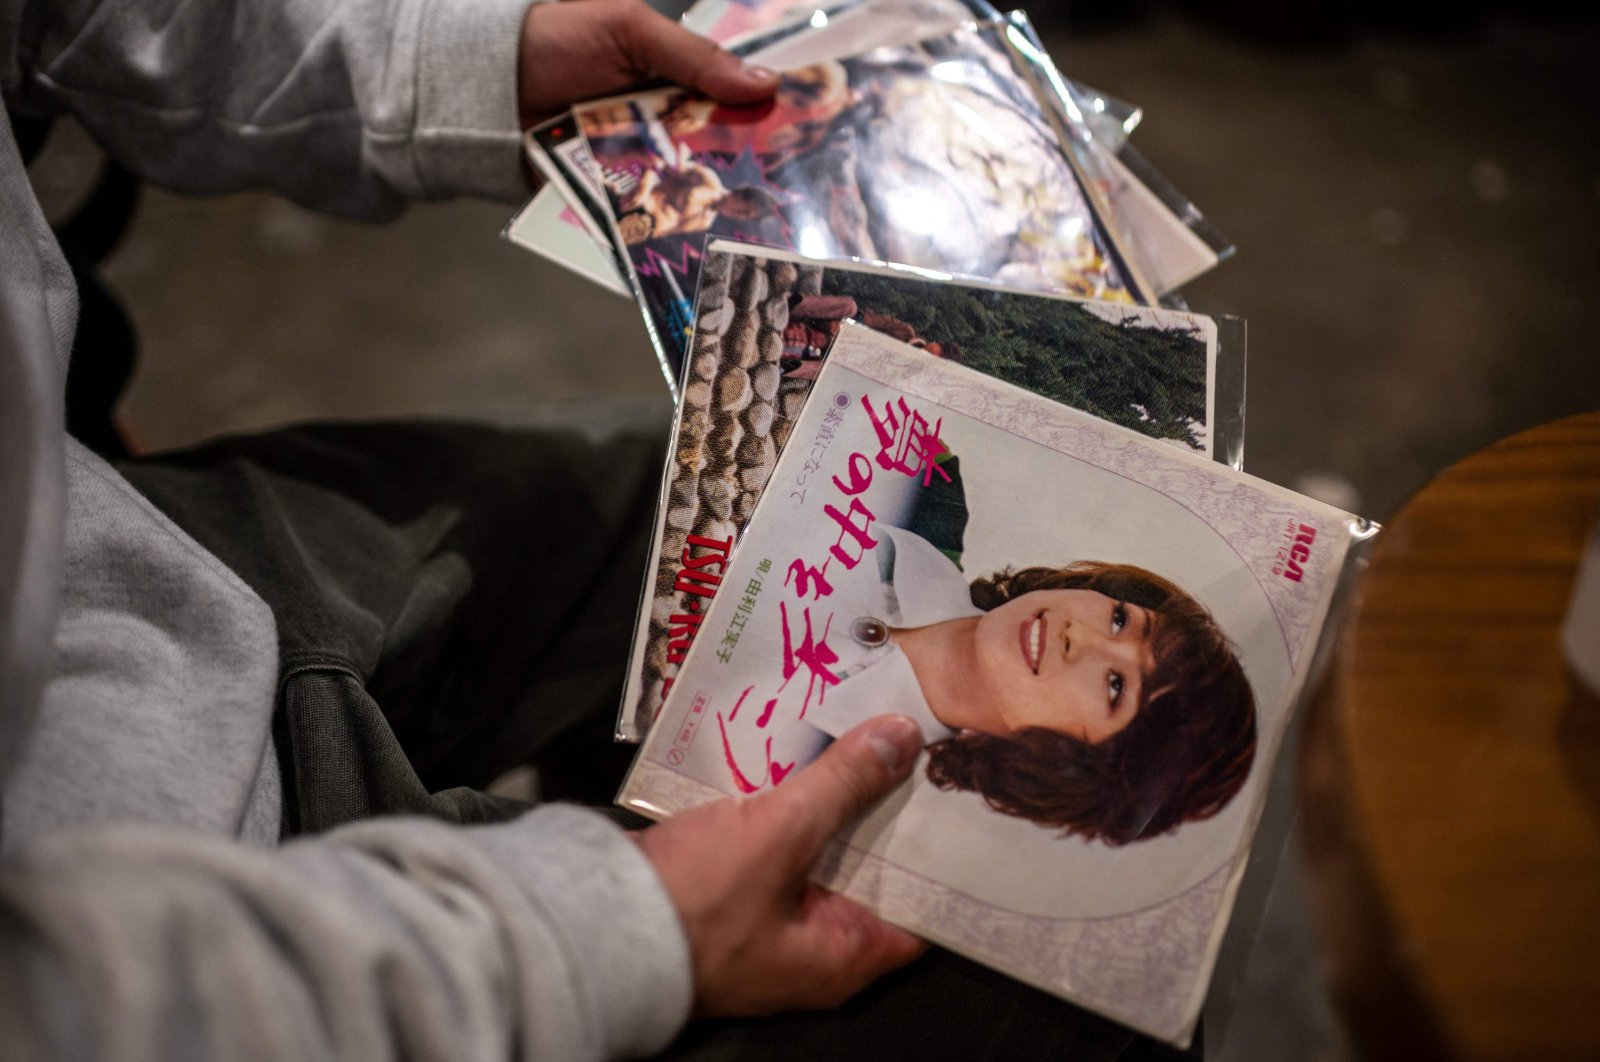 DJ Kei Notoya, who has collected around City Pop 3,000 records, looks through various Japanese records from the 1970s and 1980s in Tokyo, Japan, Feb. 6, 2022. (AFP)